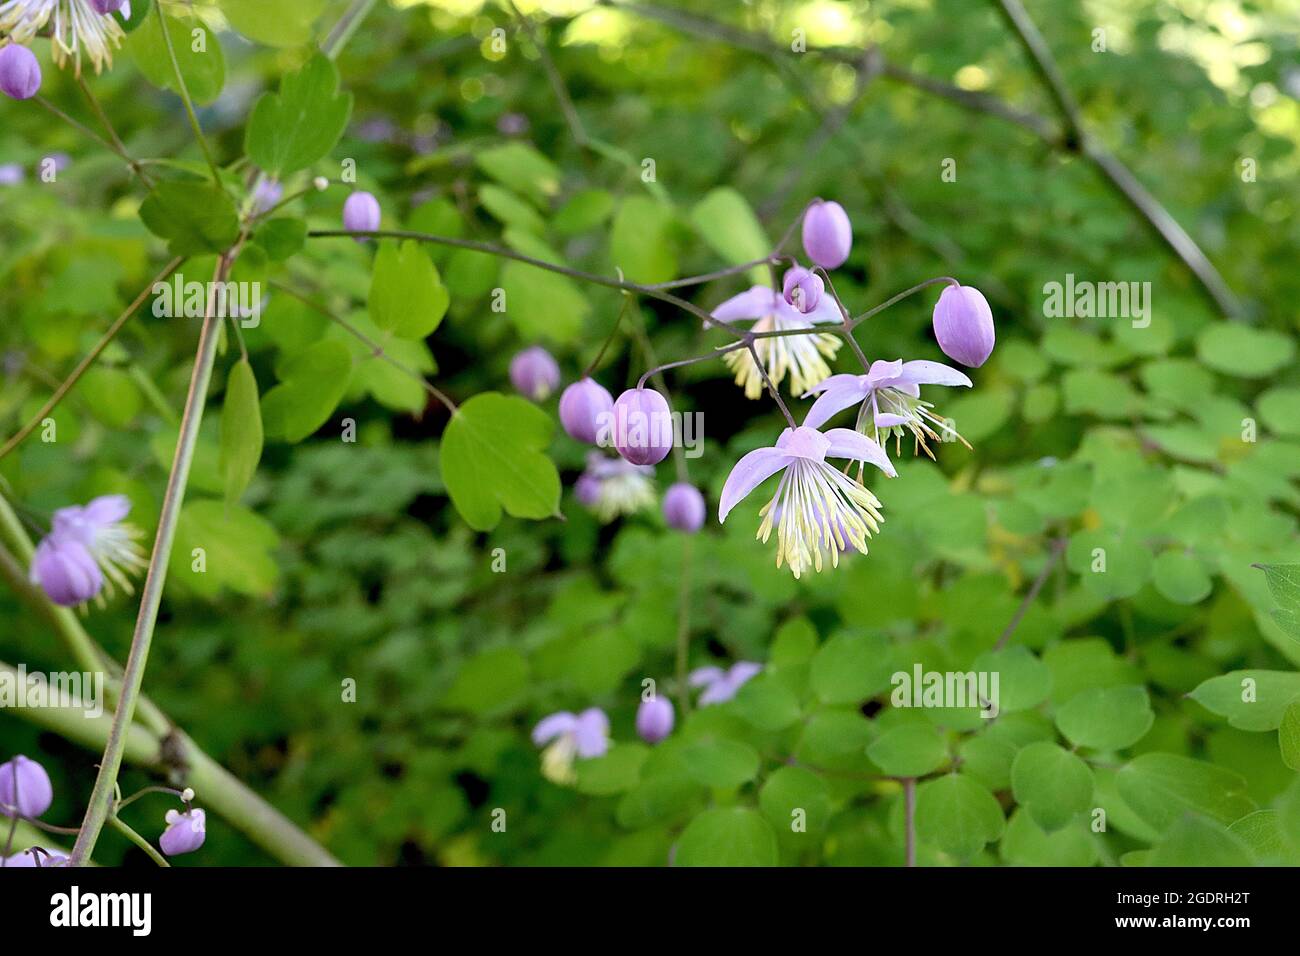 Thalictrum delavayi ‘Ankum’ Chinese meadow rue Ankum – airy panicles of pendulous mauve flowers with long white yellow-tipped stamens, tall stems, Stock Photo